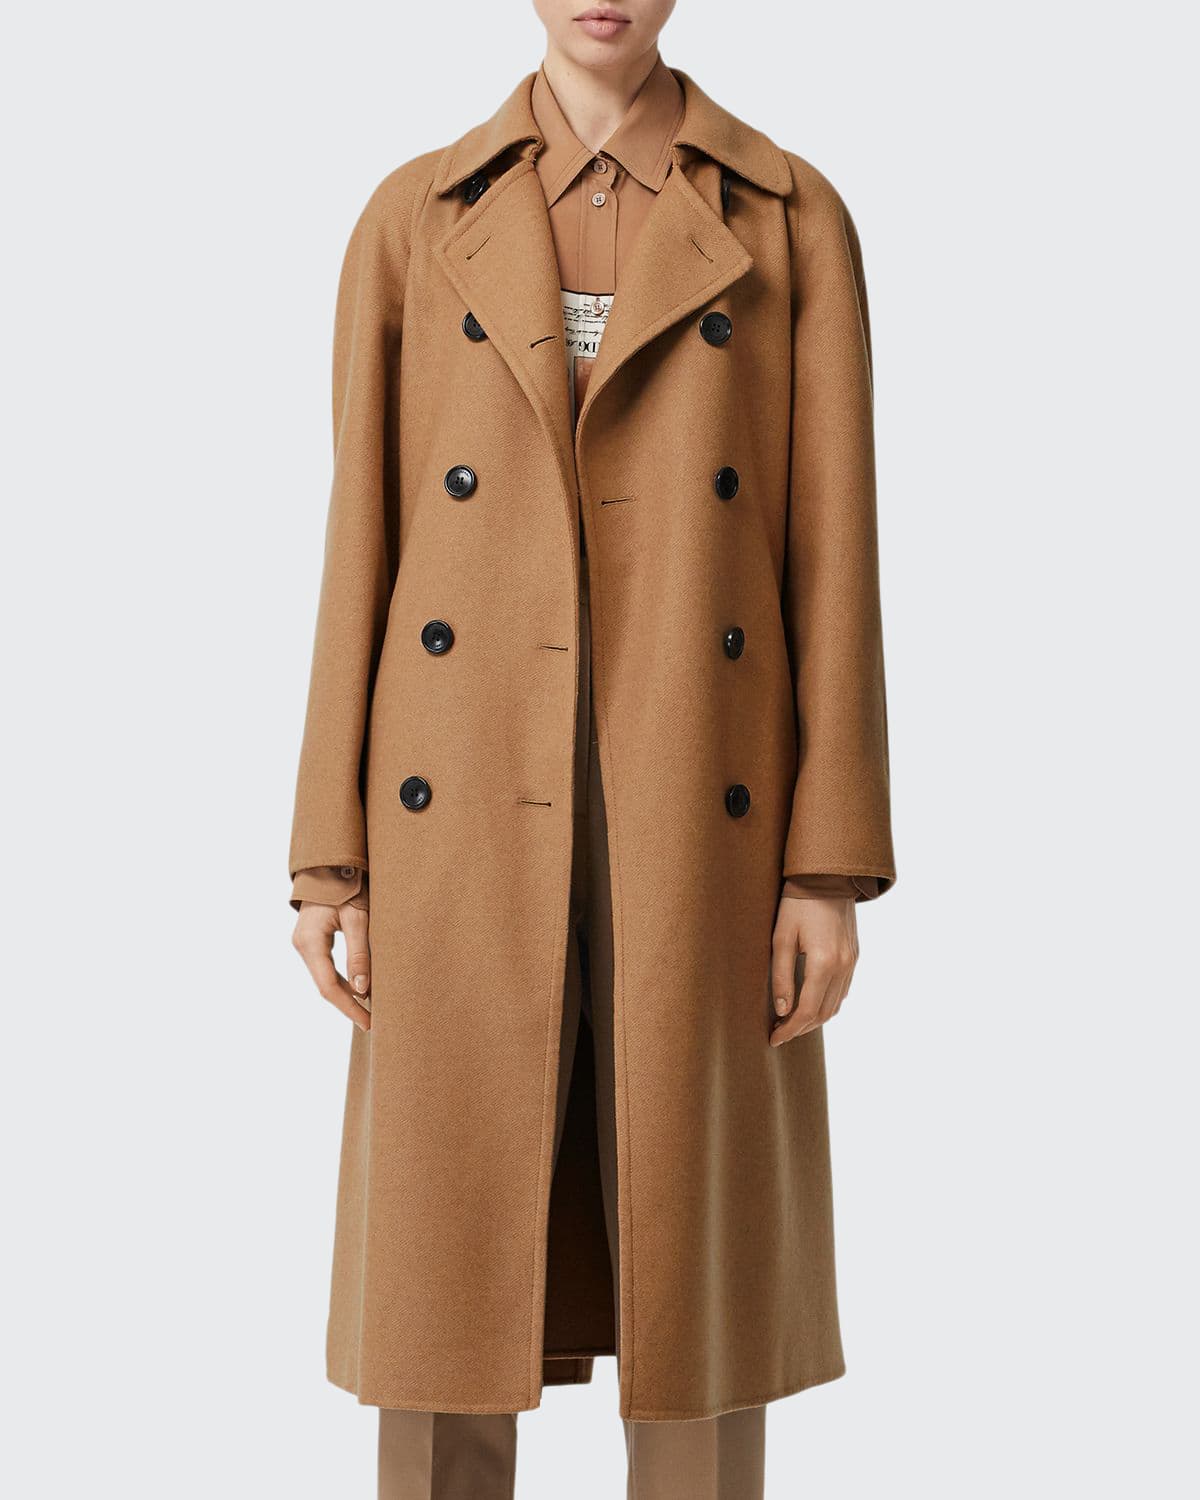 Burberry CASHMERE TWILL DOUBLE-BREASTED TRENCH COAT